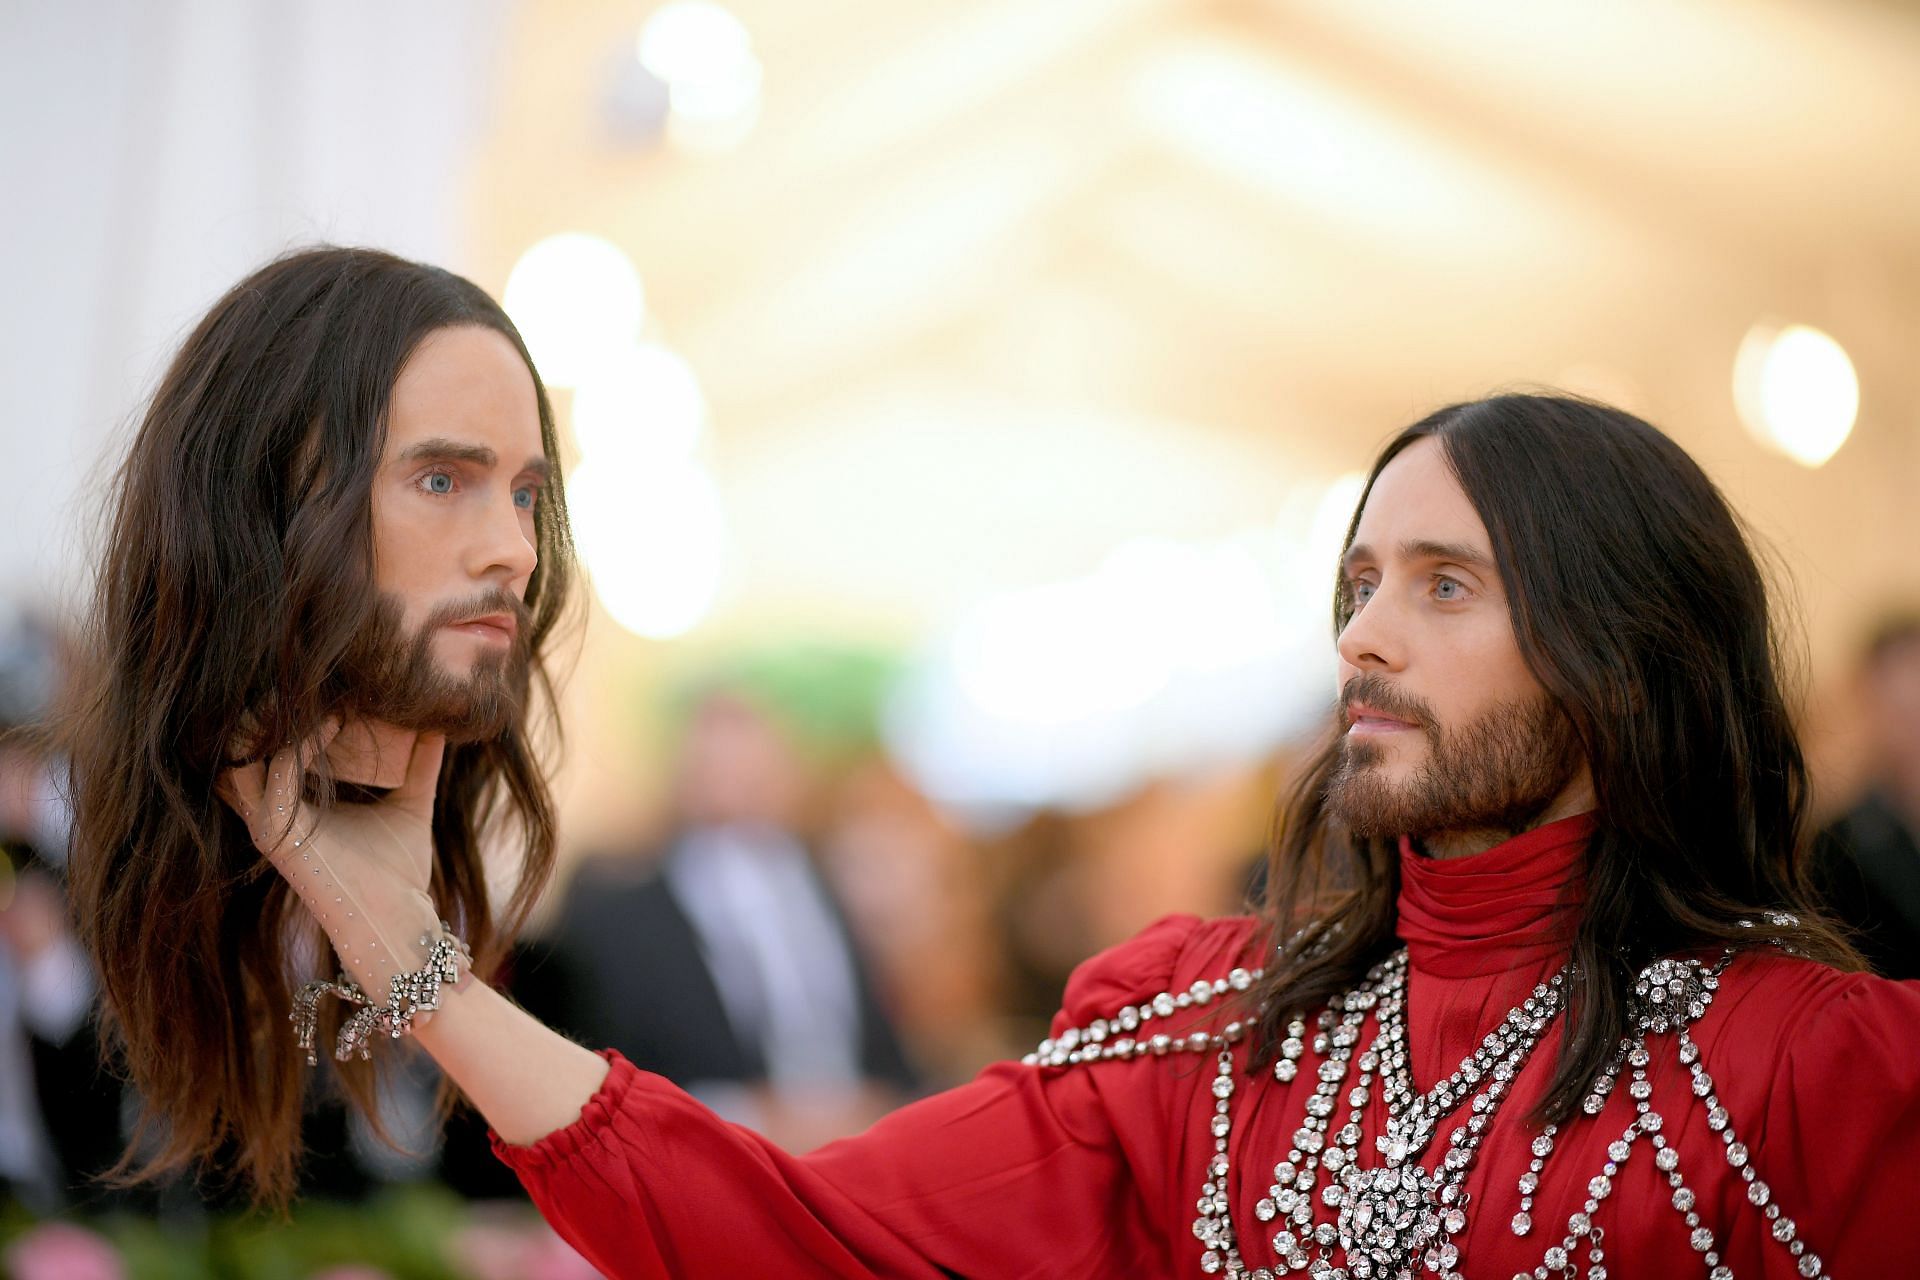 Jared Leto at The 2019 Met Gala Celebrating Camp: Notes on Fashion (Image via Getty)